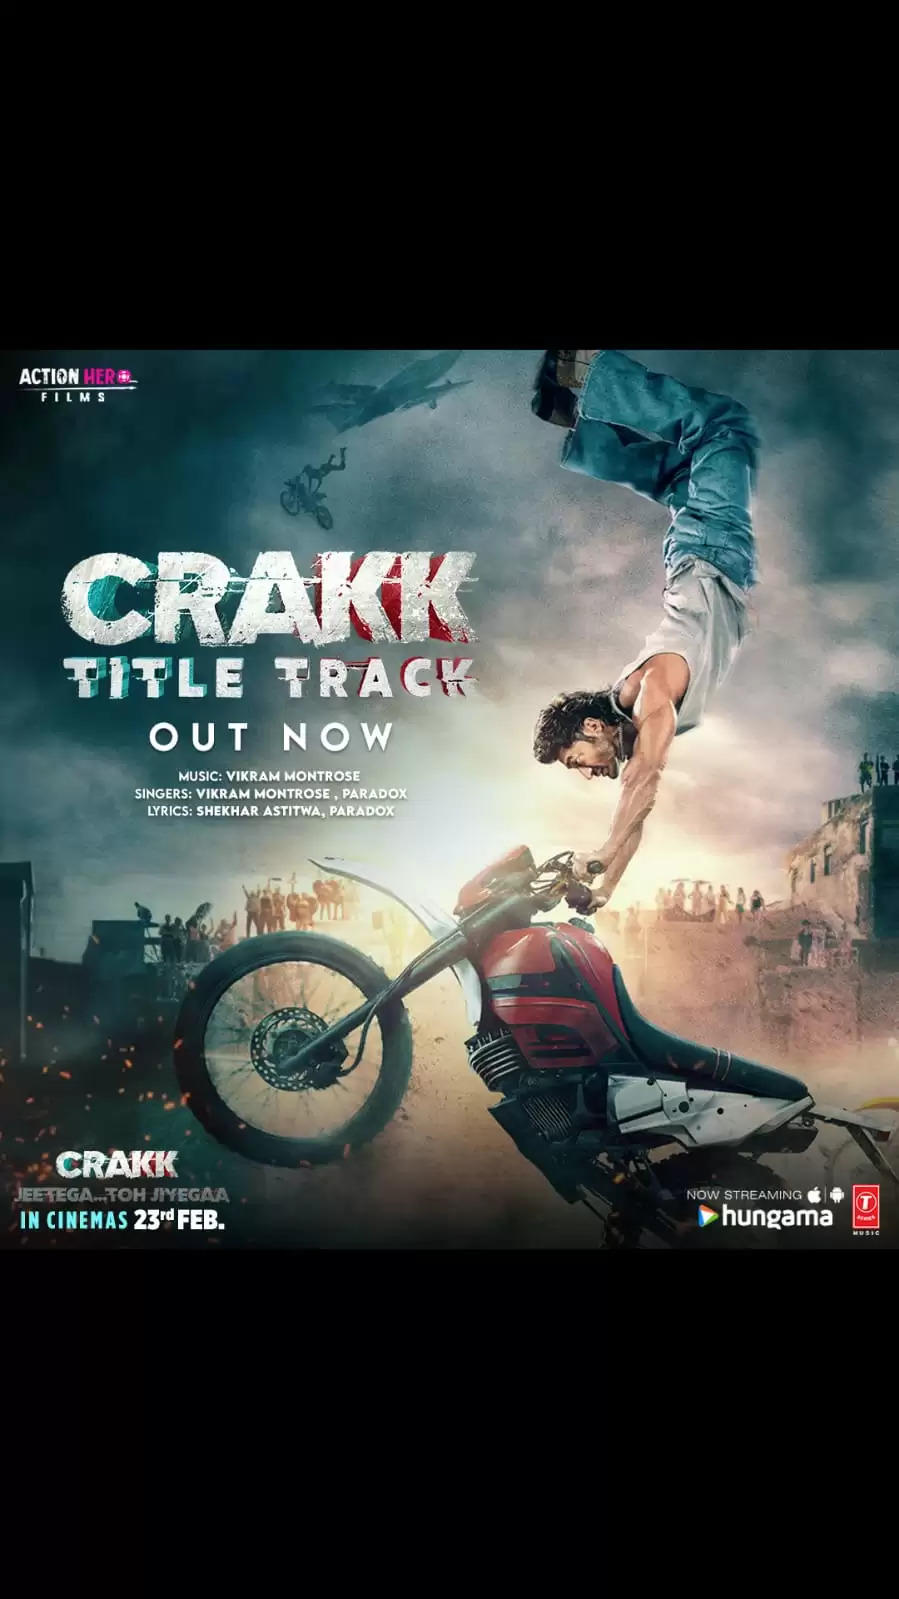 The makers of Crakk-Jeetegaa Toh Jiyegaa Unleash adrenaline fueled Opening Sequence: Vidyut Jammwal Executes Daring Stunts on a Local Train in Title Track – Song Out Now!